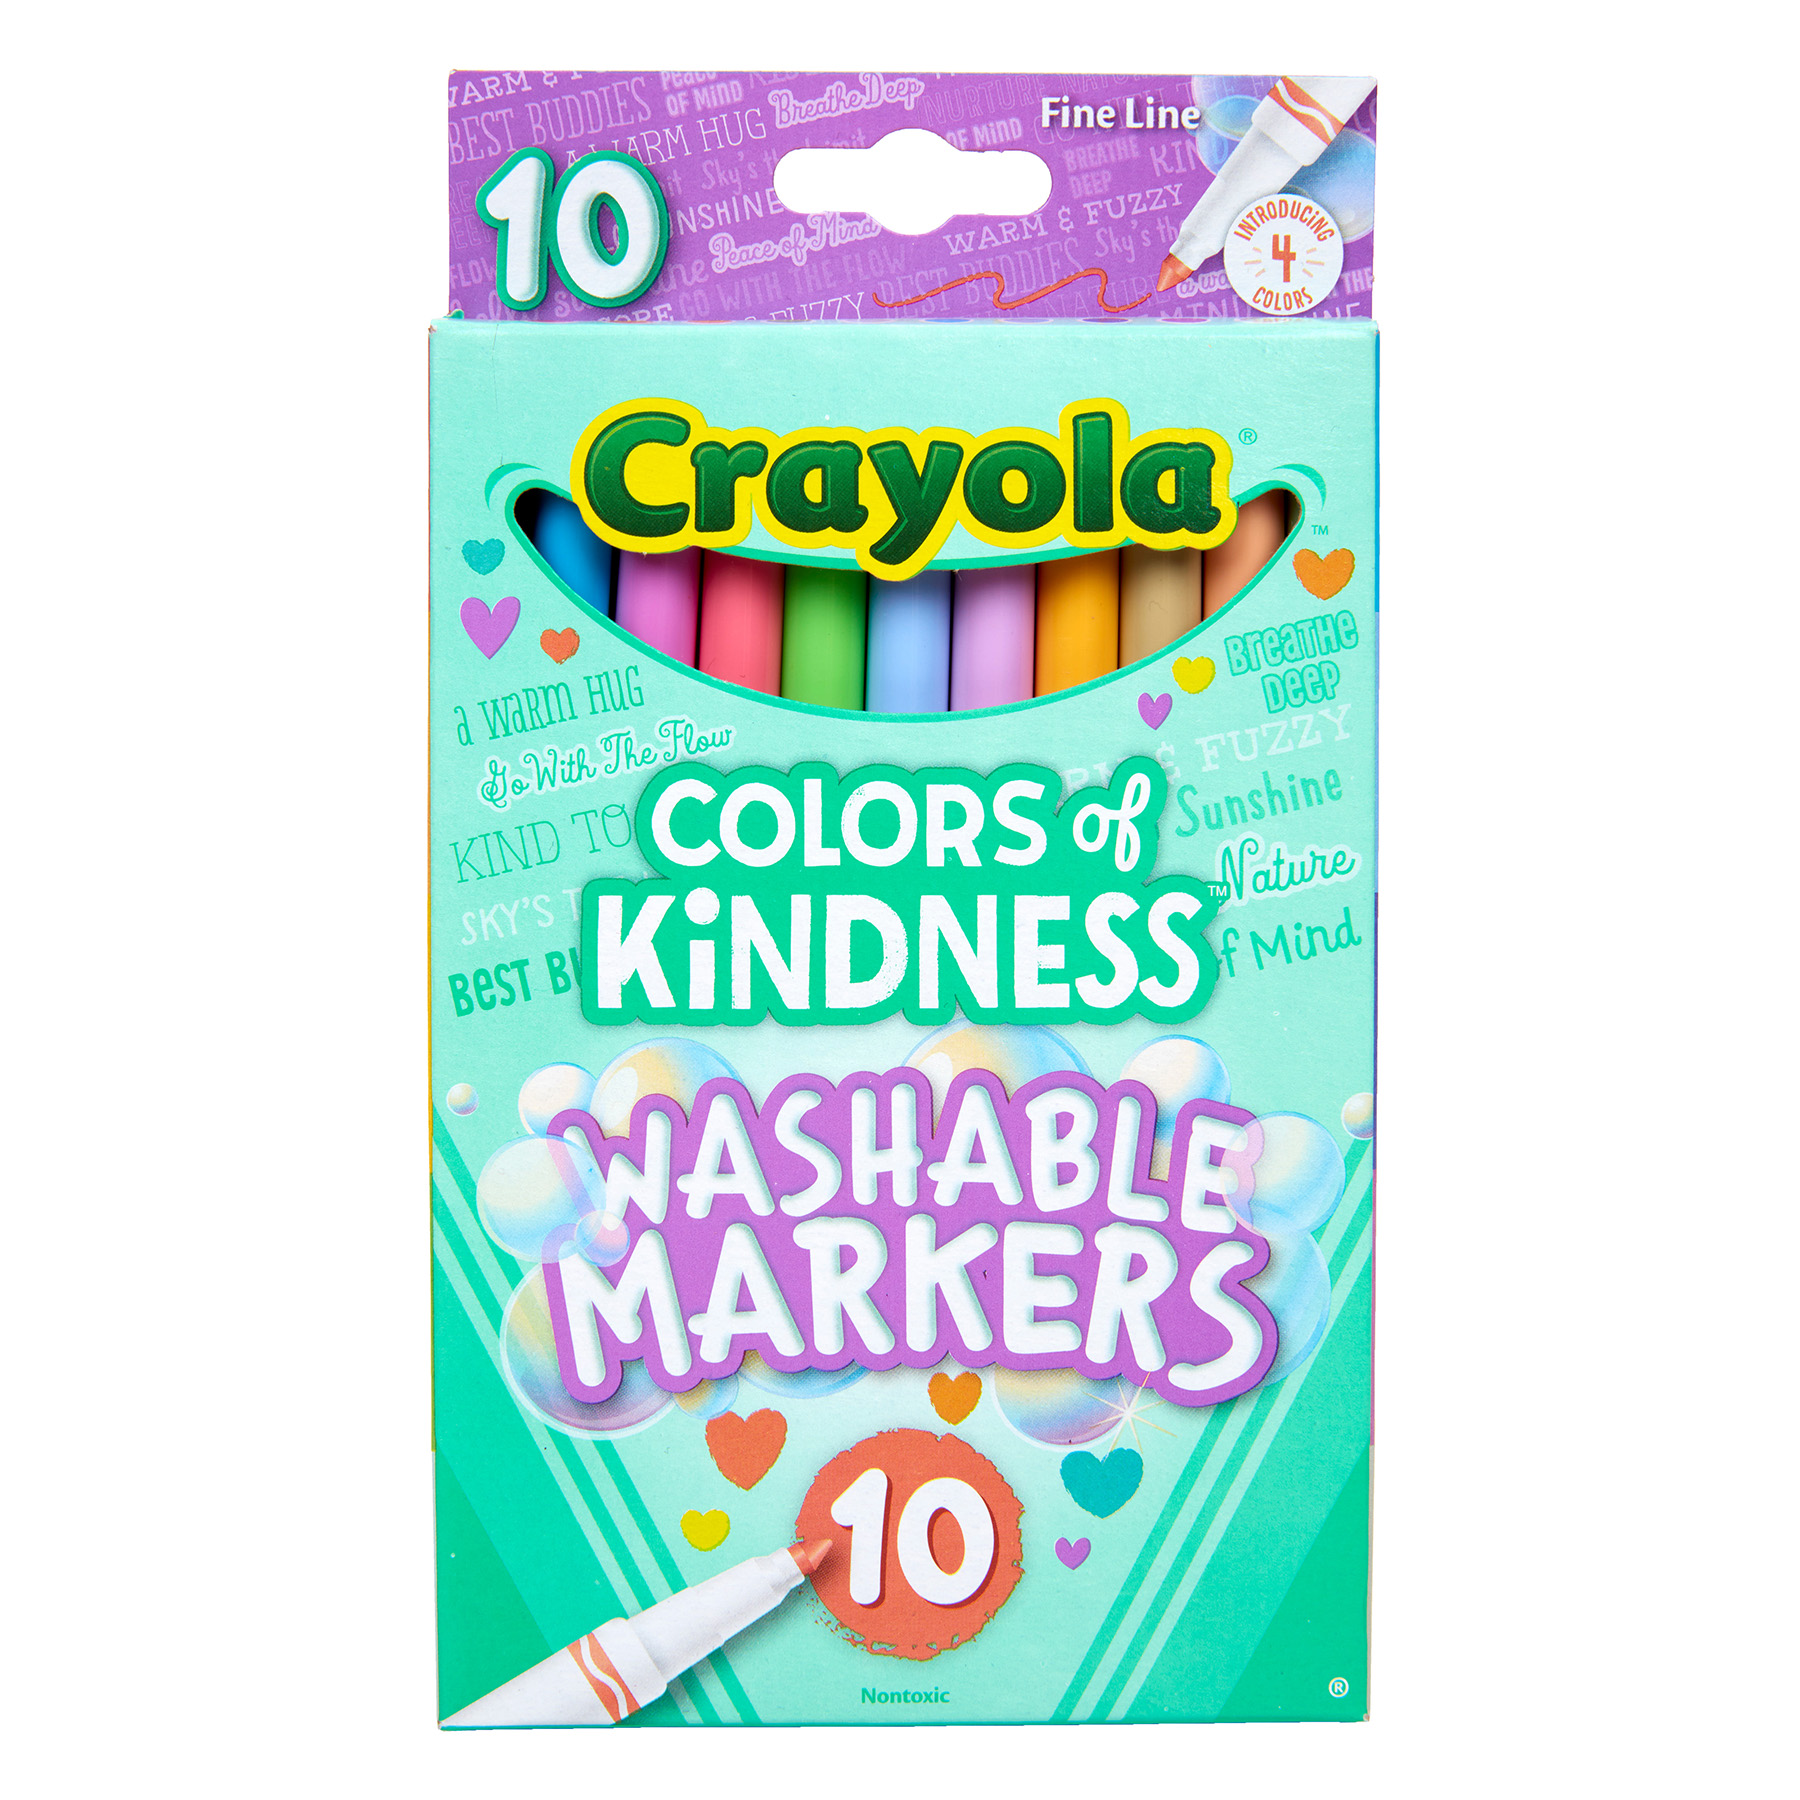 The Teachers' Lounge®  Colors of the World Fine Line Markers, 24